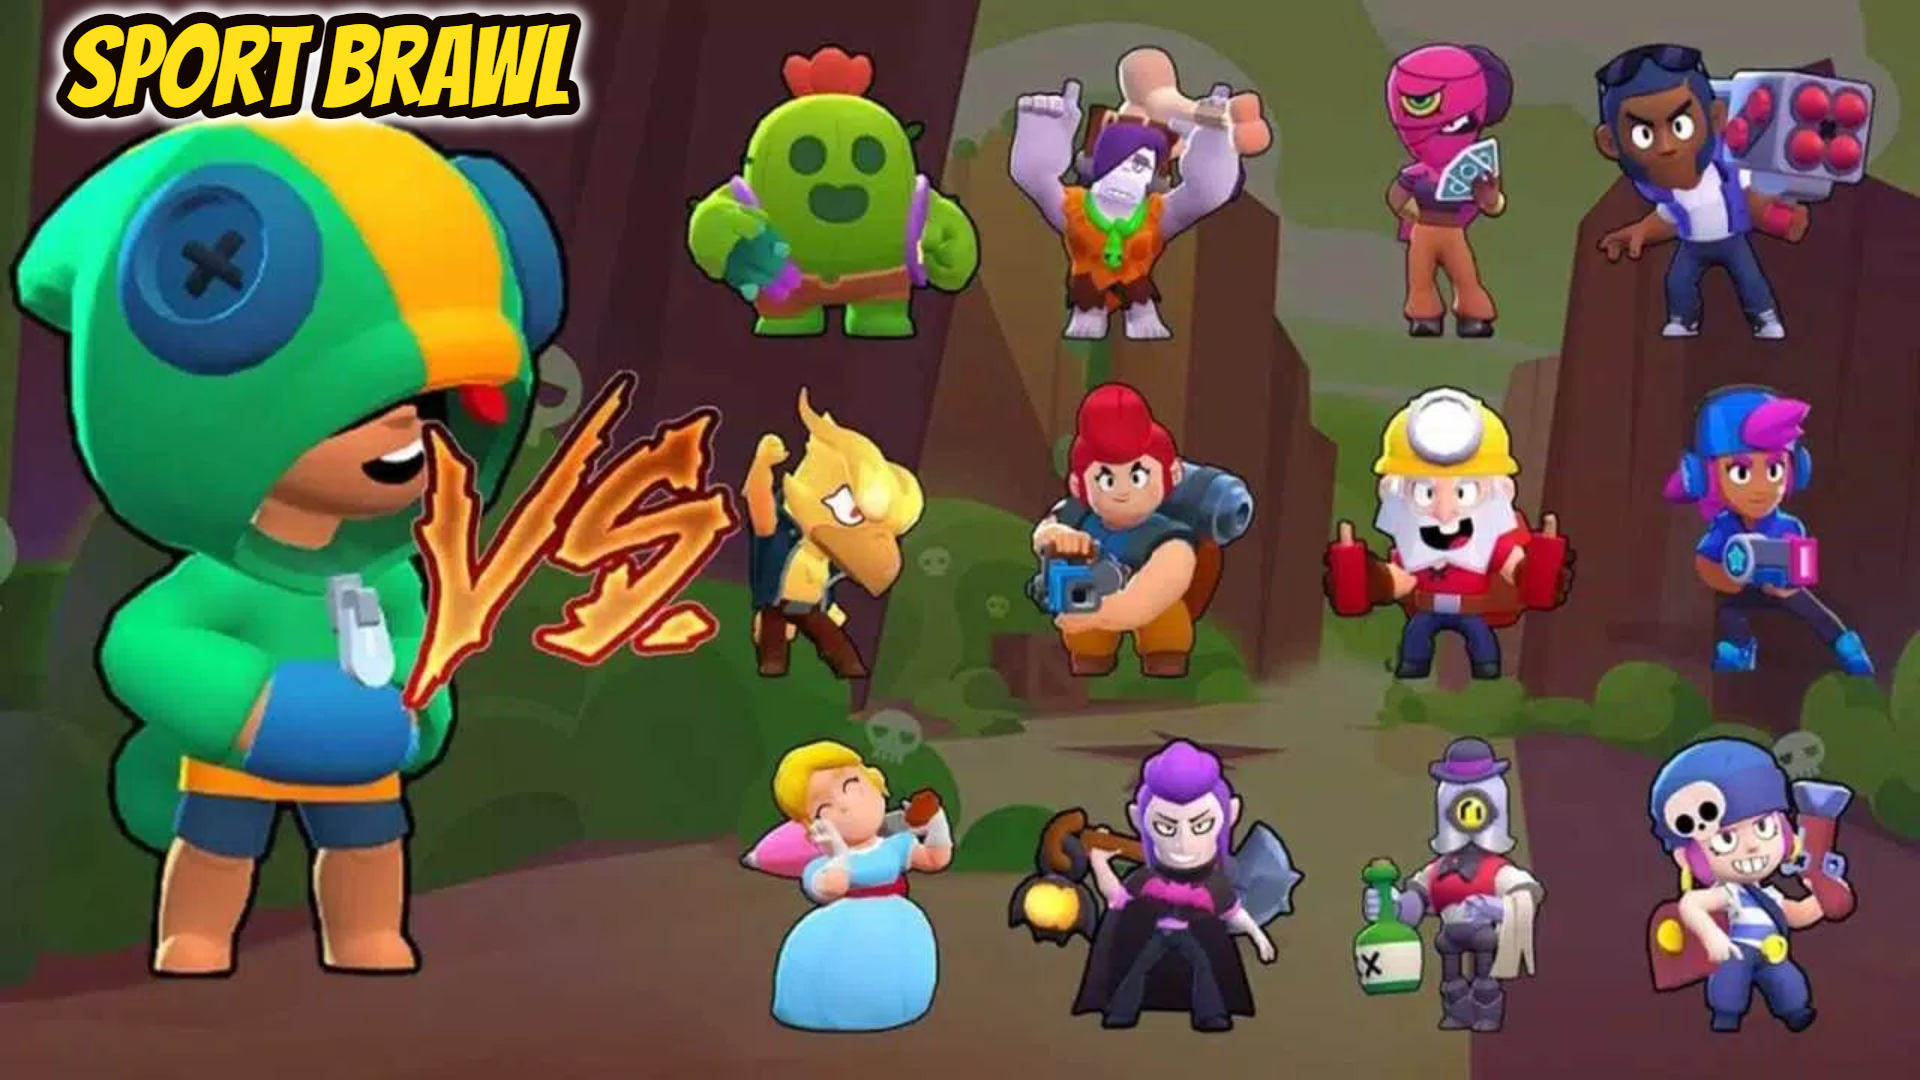 How to Download Sport Brawl Latest Version on Android